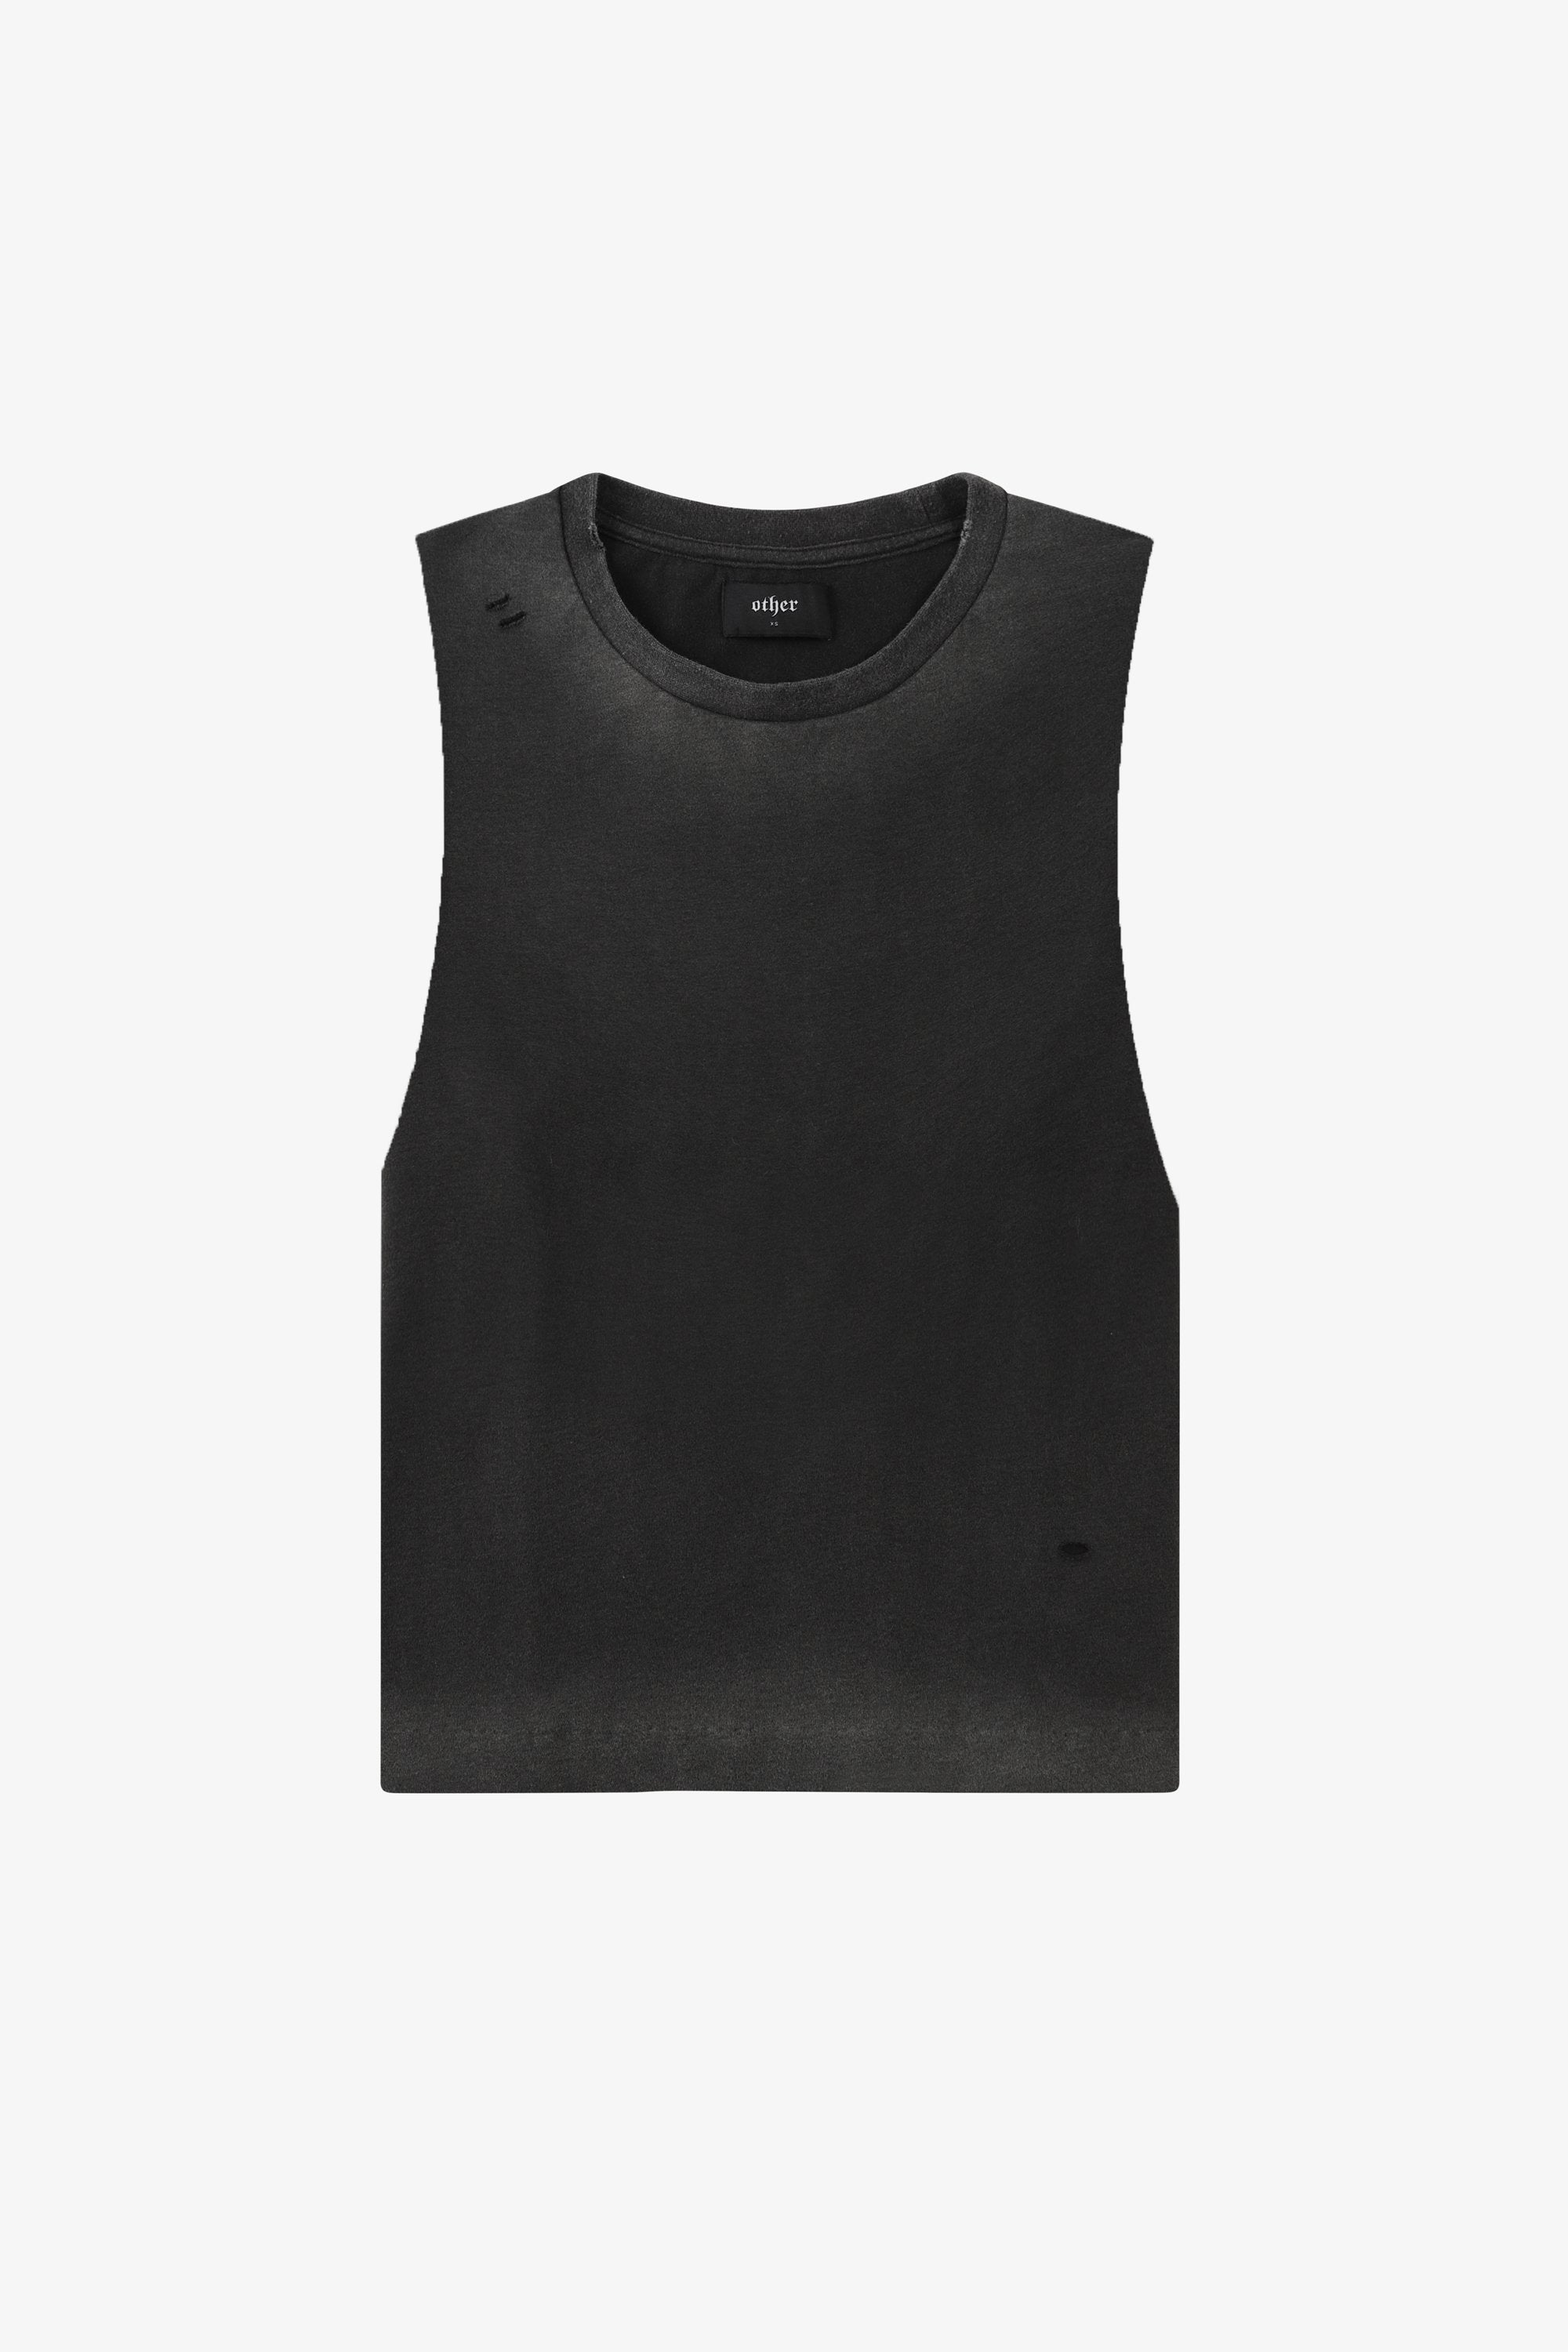 The Vintage Tank | Heavy Relic Black – OTHER